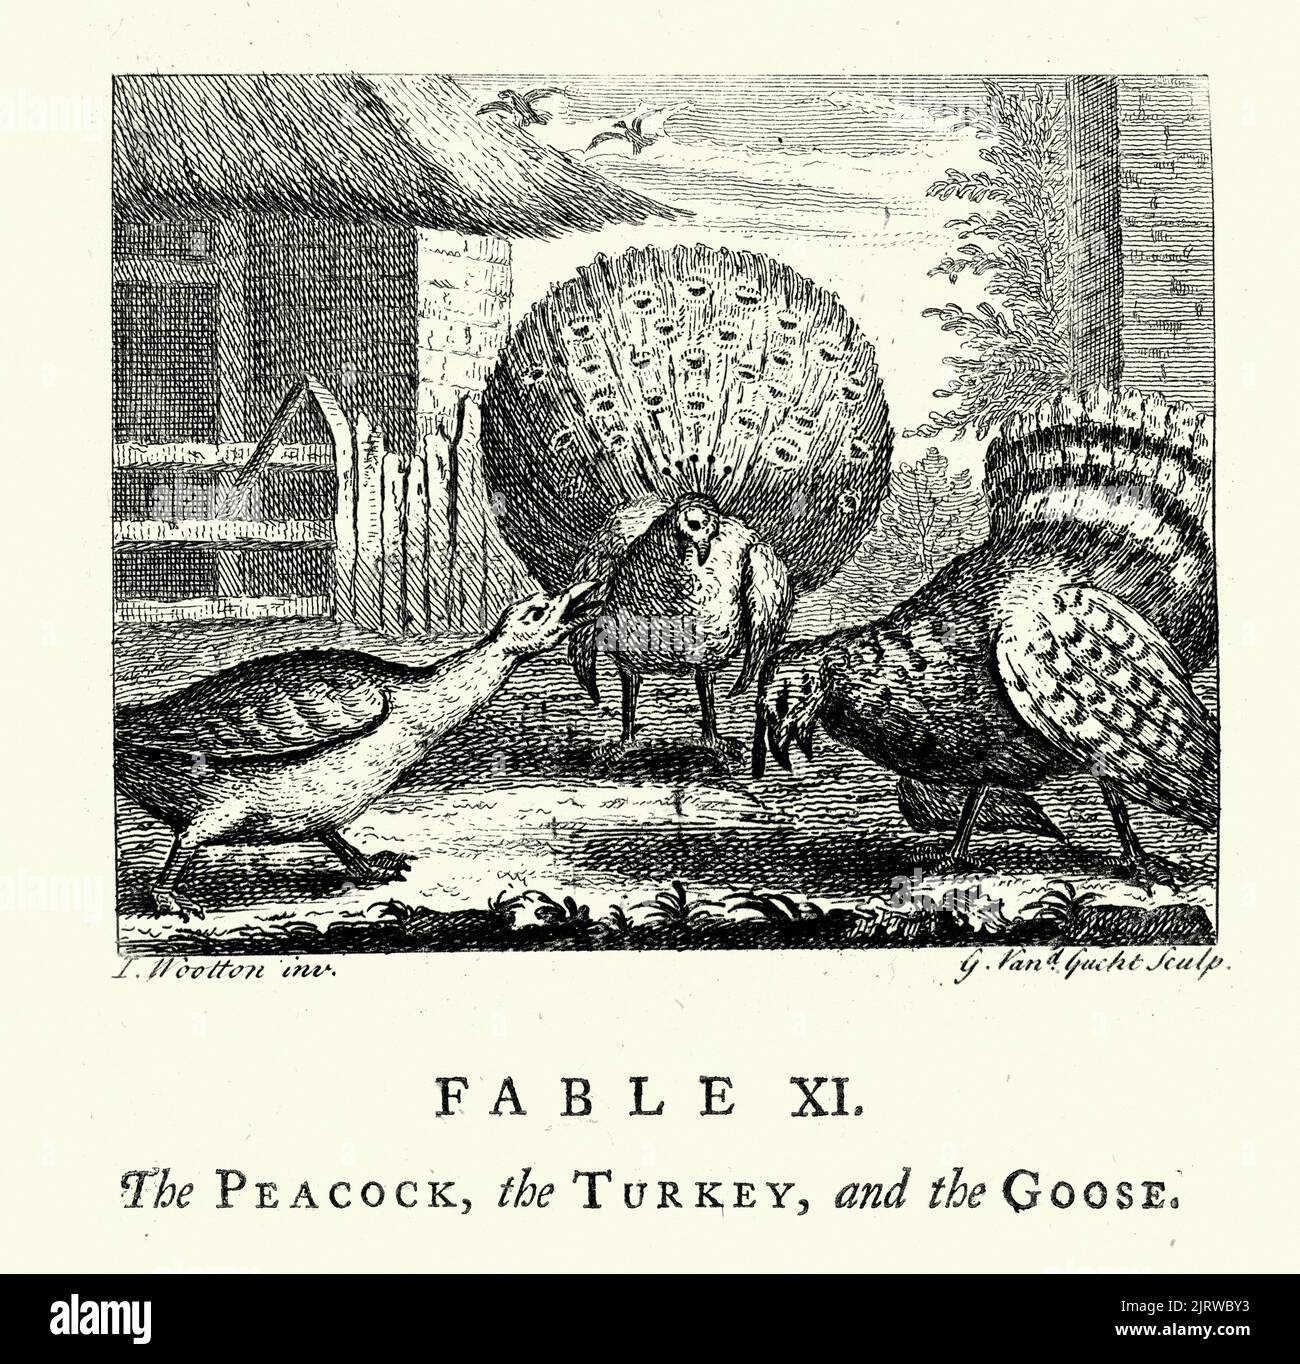 Vintage engraving The Peacock, the Turkey and the Goose, From the Fables of John Gay 18th Century Stock Photo